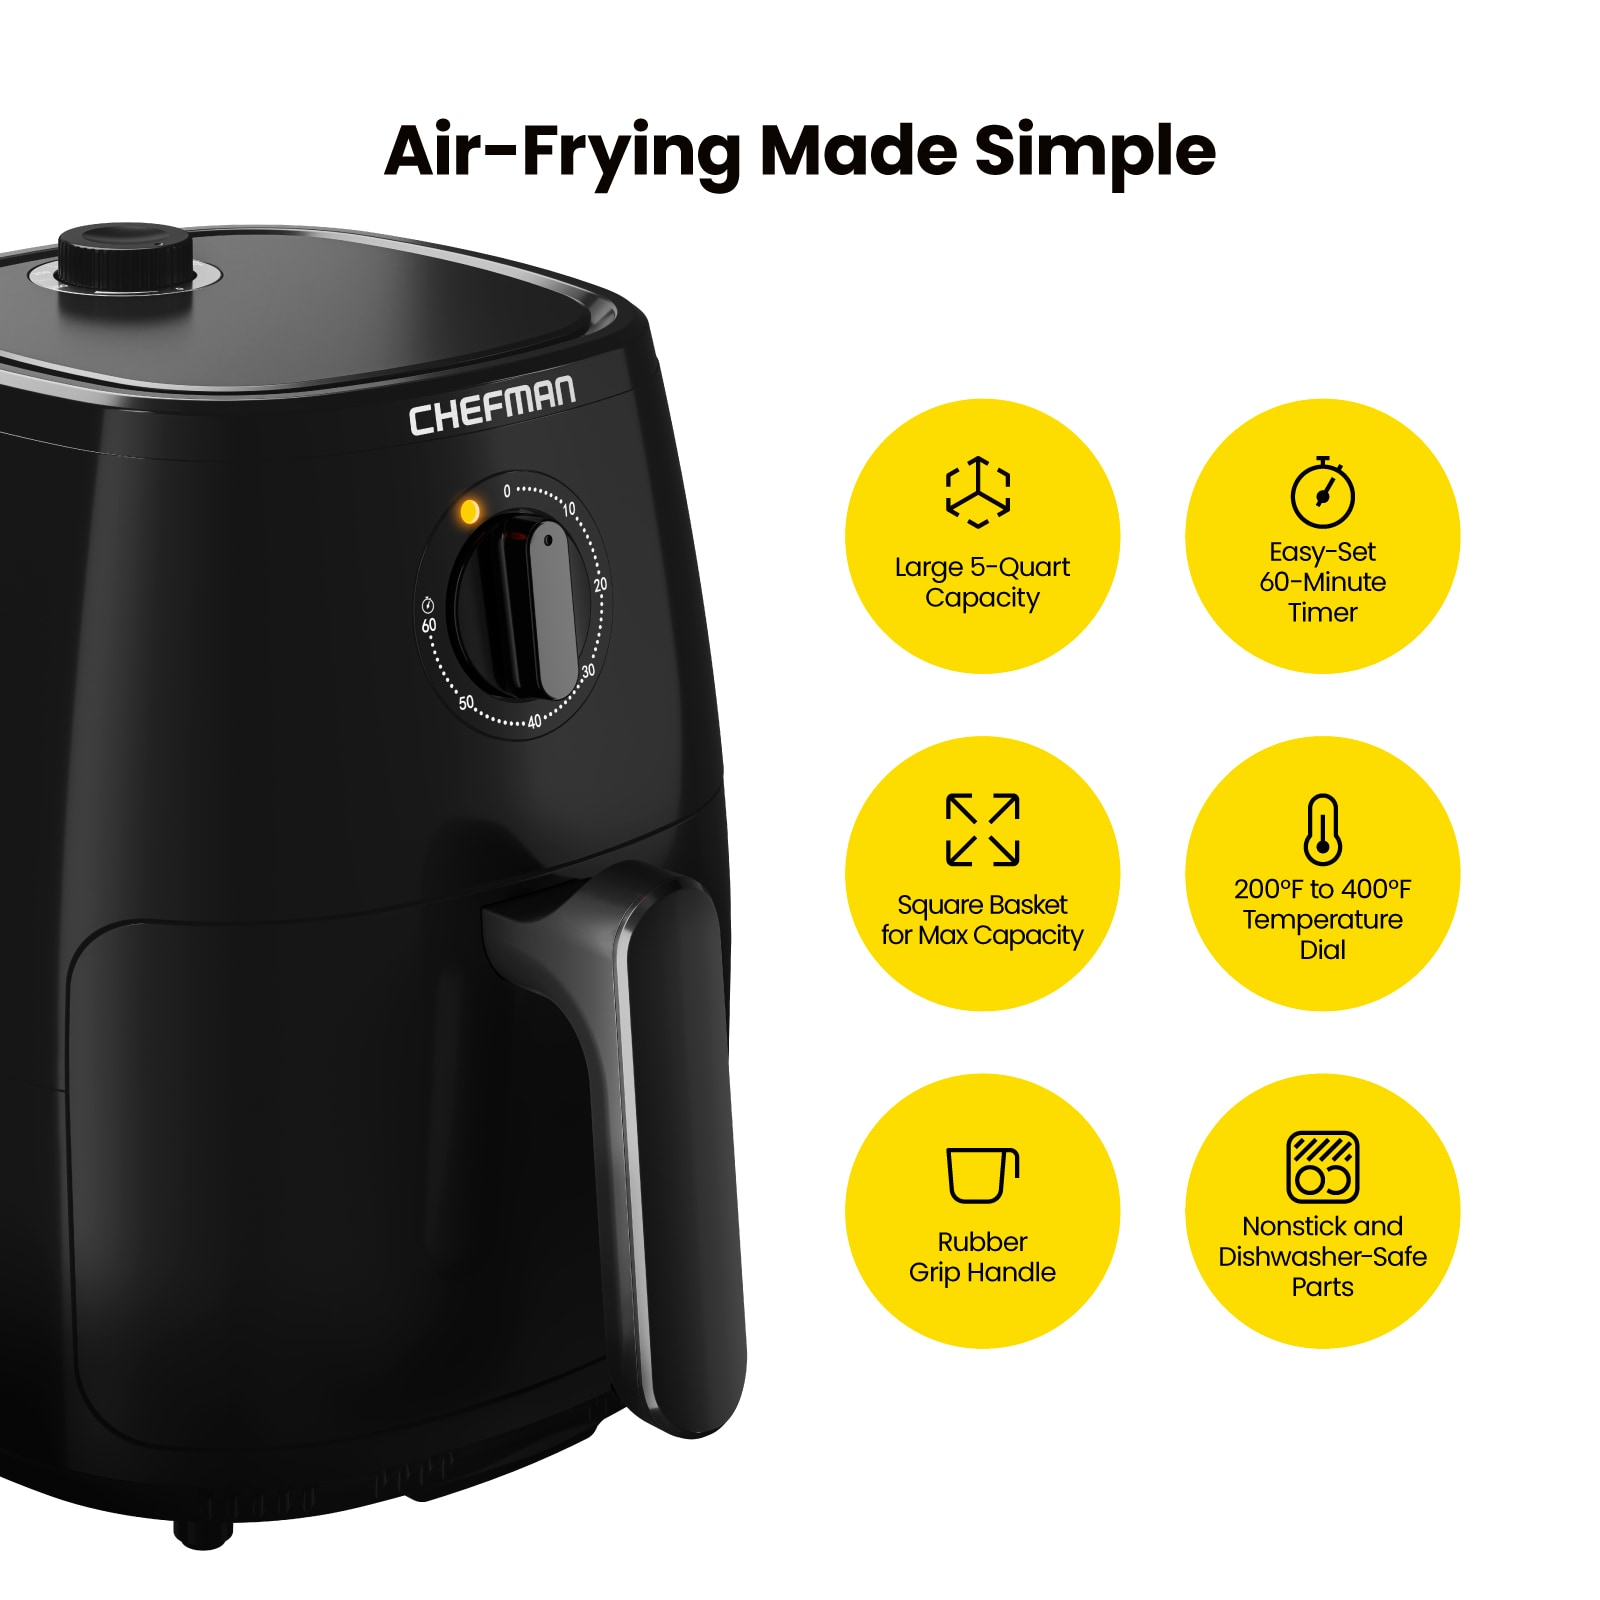 Big Boss Oil-less Air Fryer, 16 Quart, 1300W, Easy Operation with Built in  timer Black 9065 - Best Buy